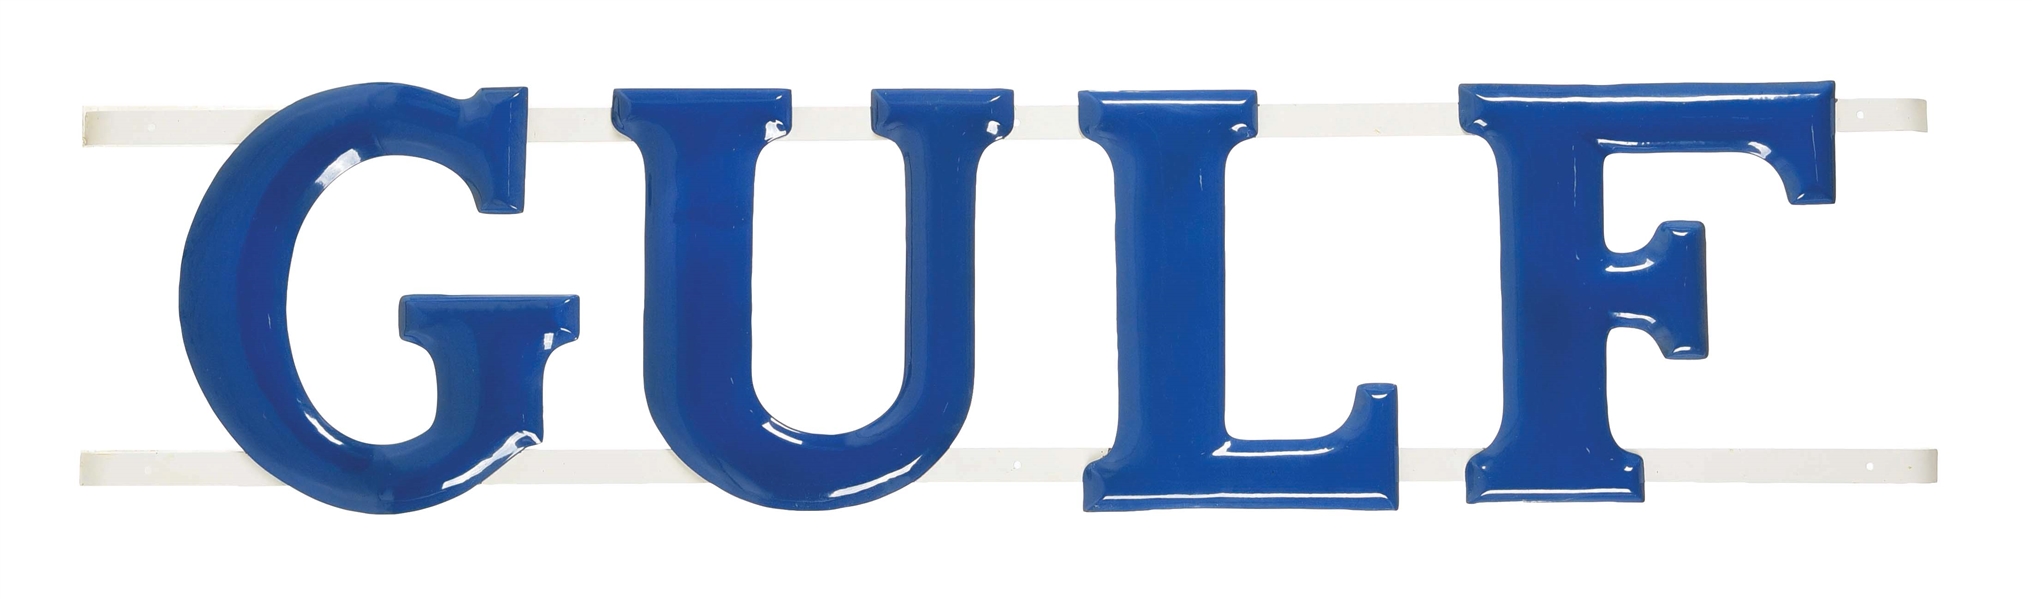 N.O.S. GULF SERVICE STATION PORCELAIN LETTERS W/ ORIGINAL HANGING CHANNEL. 